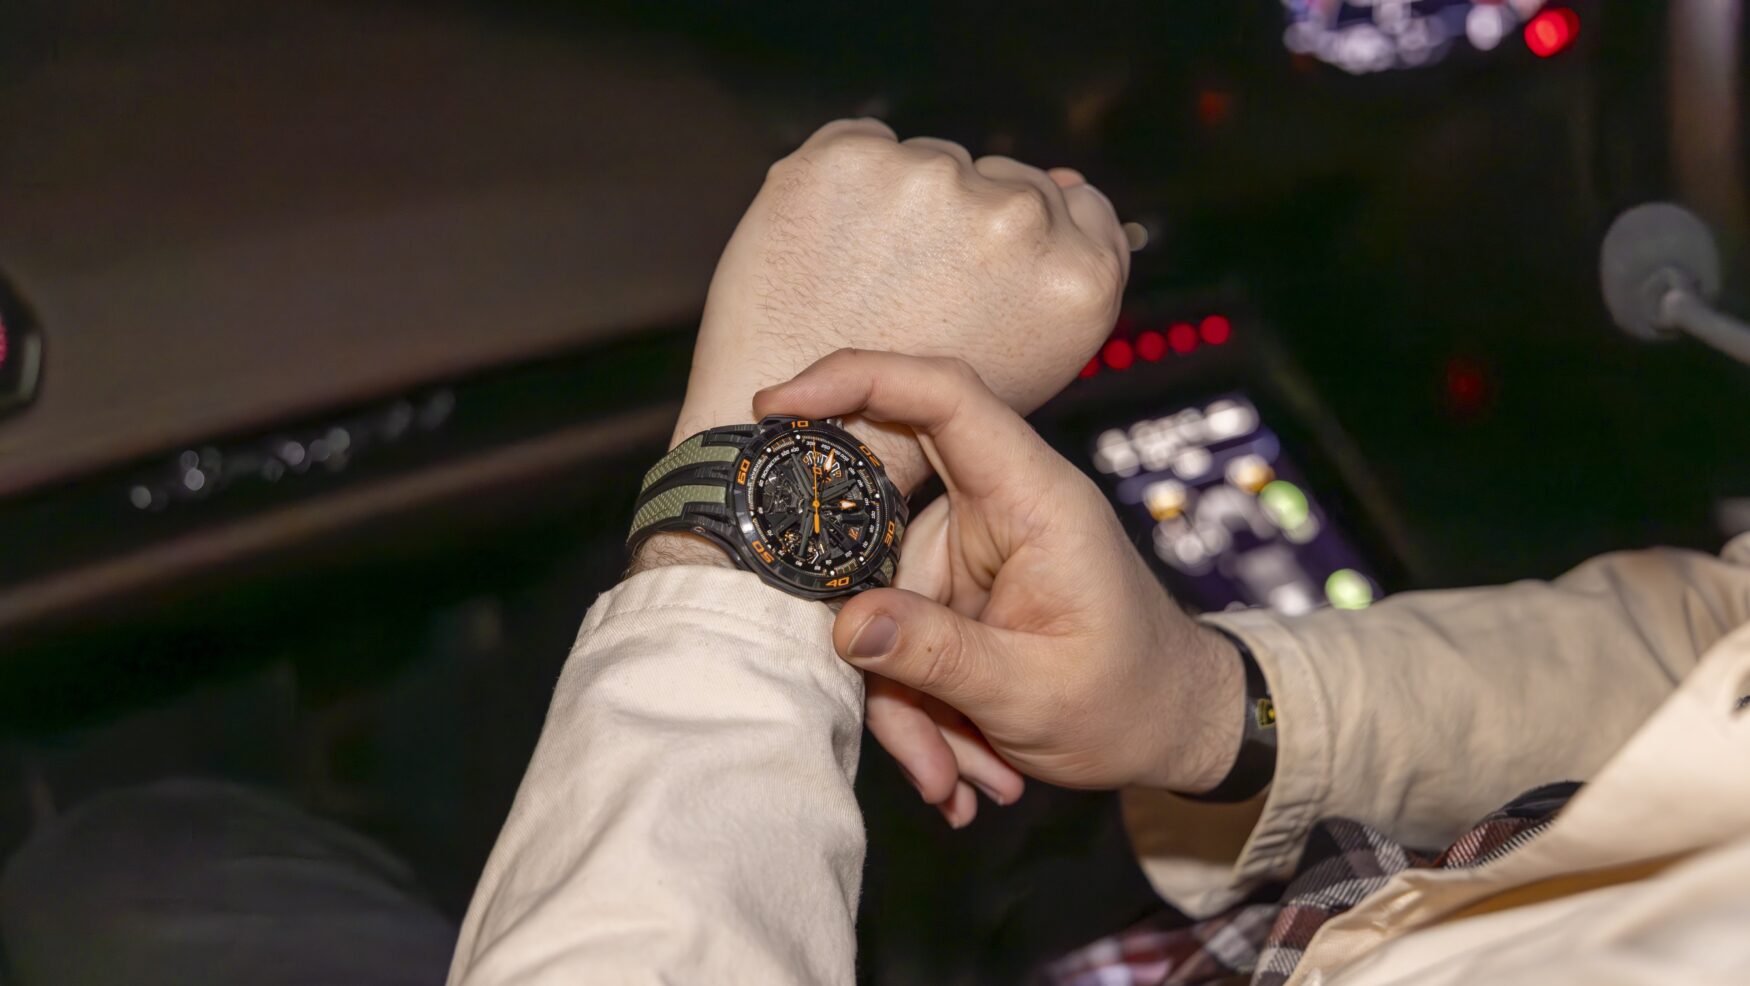 Timing Lamborghini hot laps with the Roger Dubuis Excalibur Spider Revuelto Flyback Chronograph